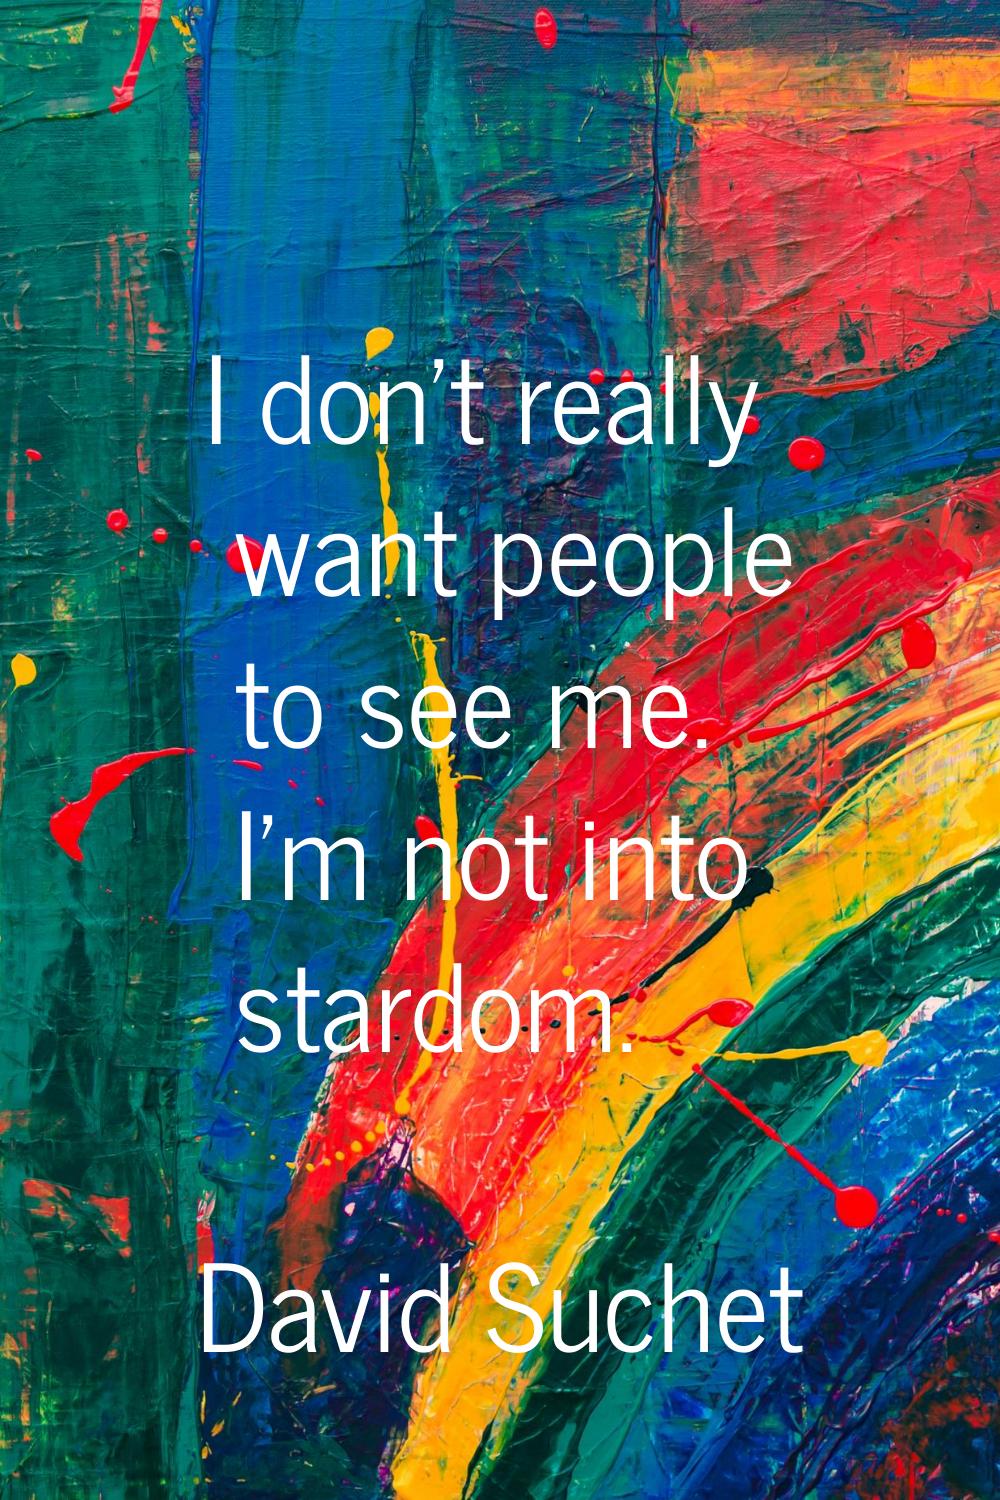 I don't really want people to see me. I'm not into stardom.